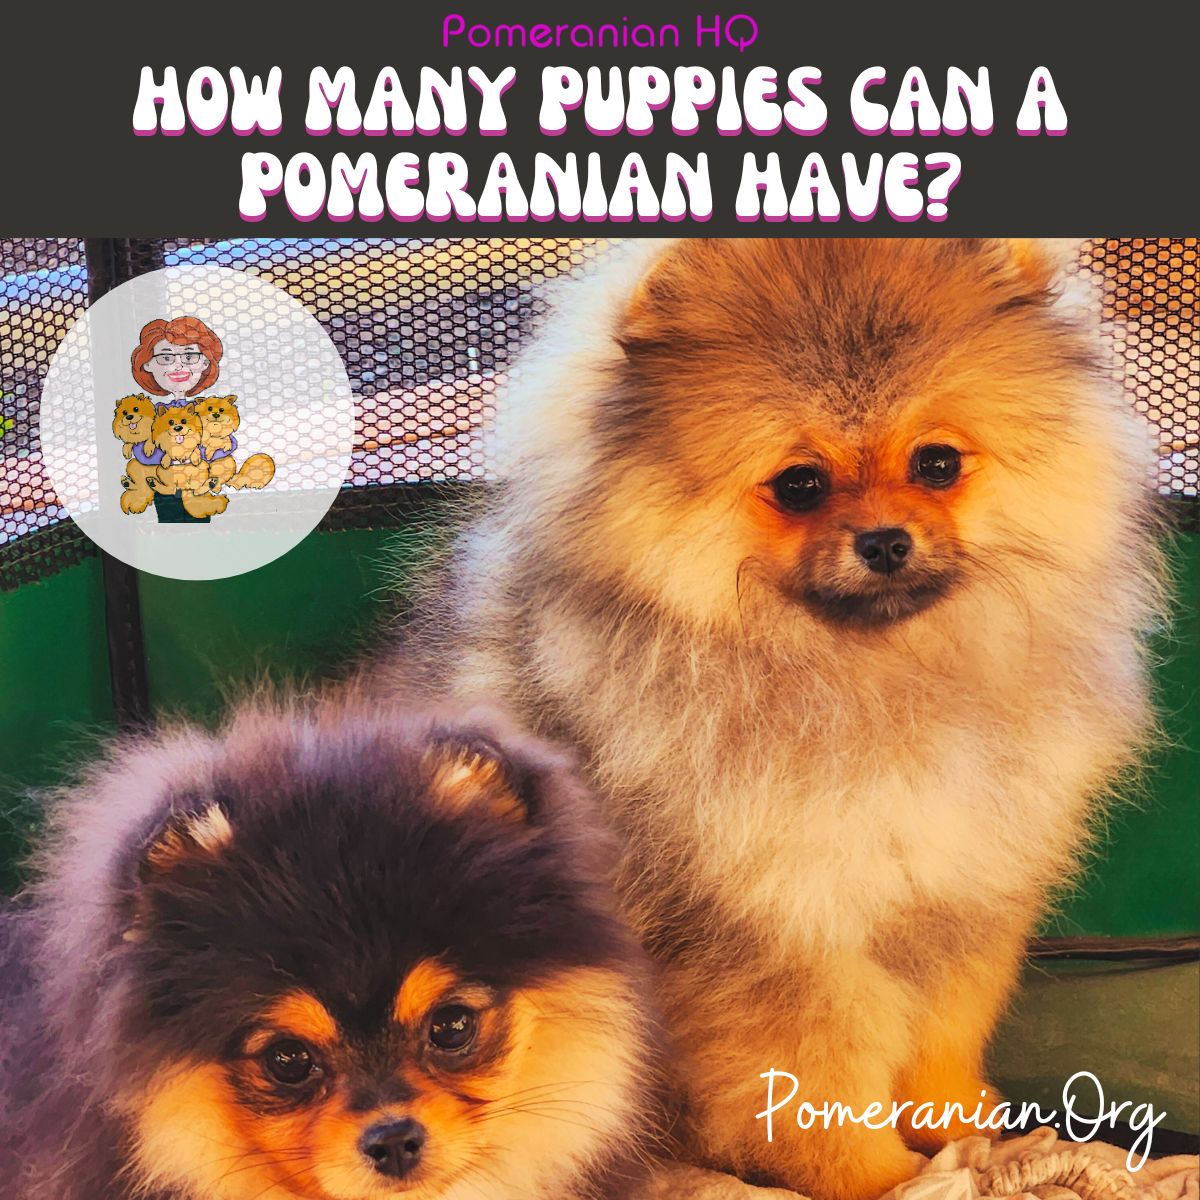 How Many Puppies Can a Pomeranian Have?